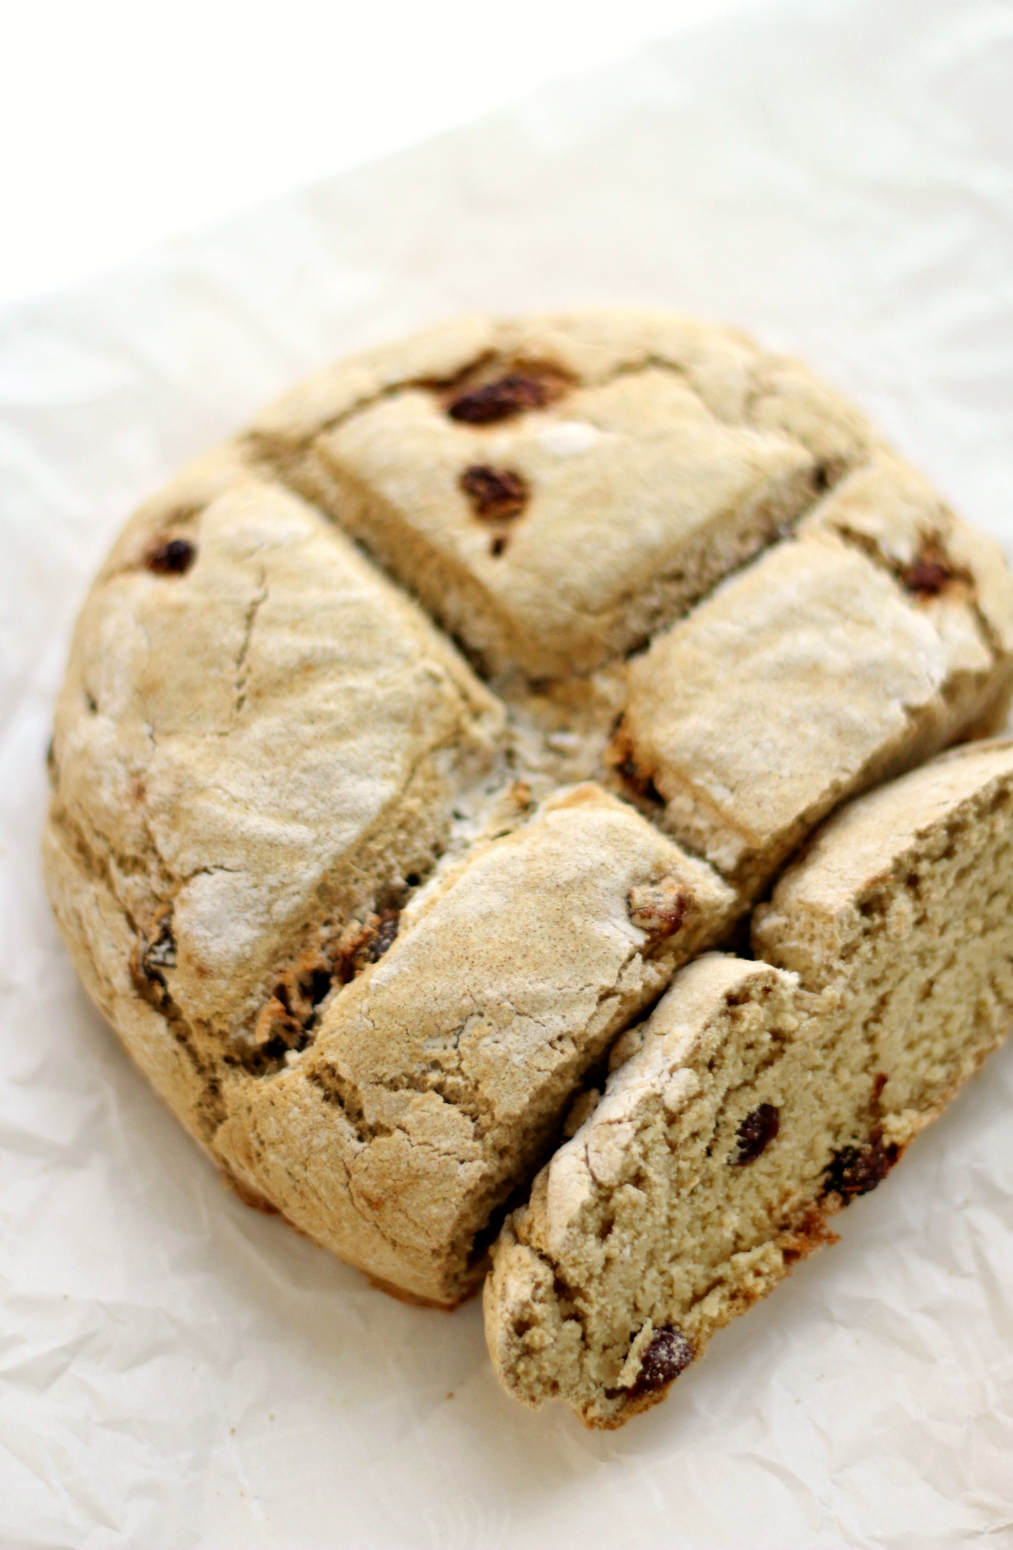 Traditional Gluten-Free Irish Soda Bread | Strength and Sunshine @RebeccaGF666 Everything a traditional Irish soda bread should be, only this one is gluten-free and vegan! A simple flour blend and spotted with raisins, everyone will feel the luck of the Irish with this simple soda bread recipe!